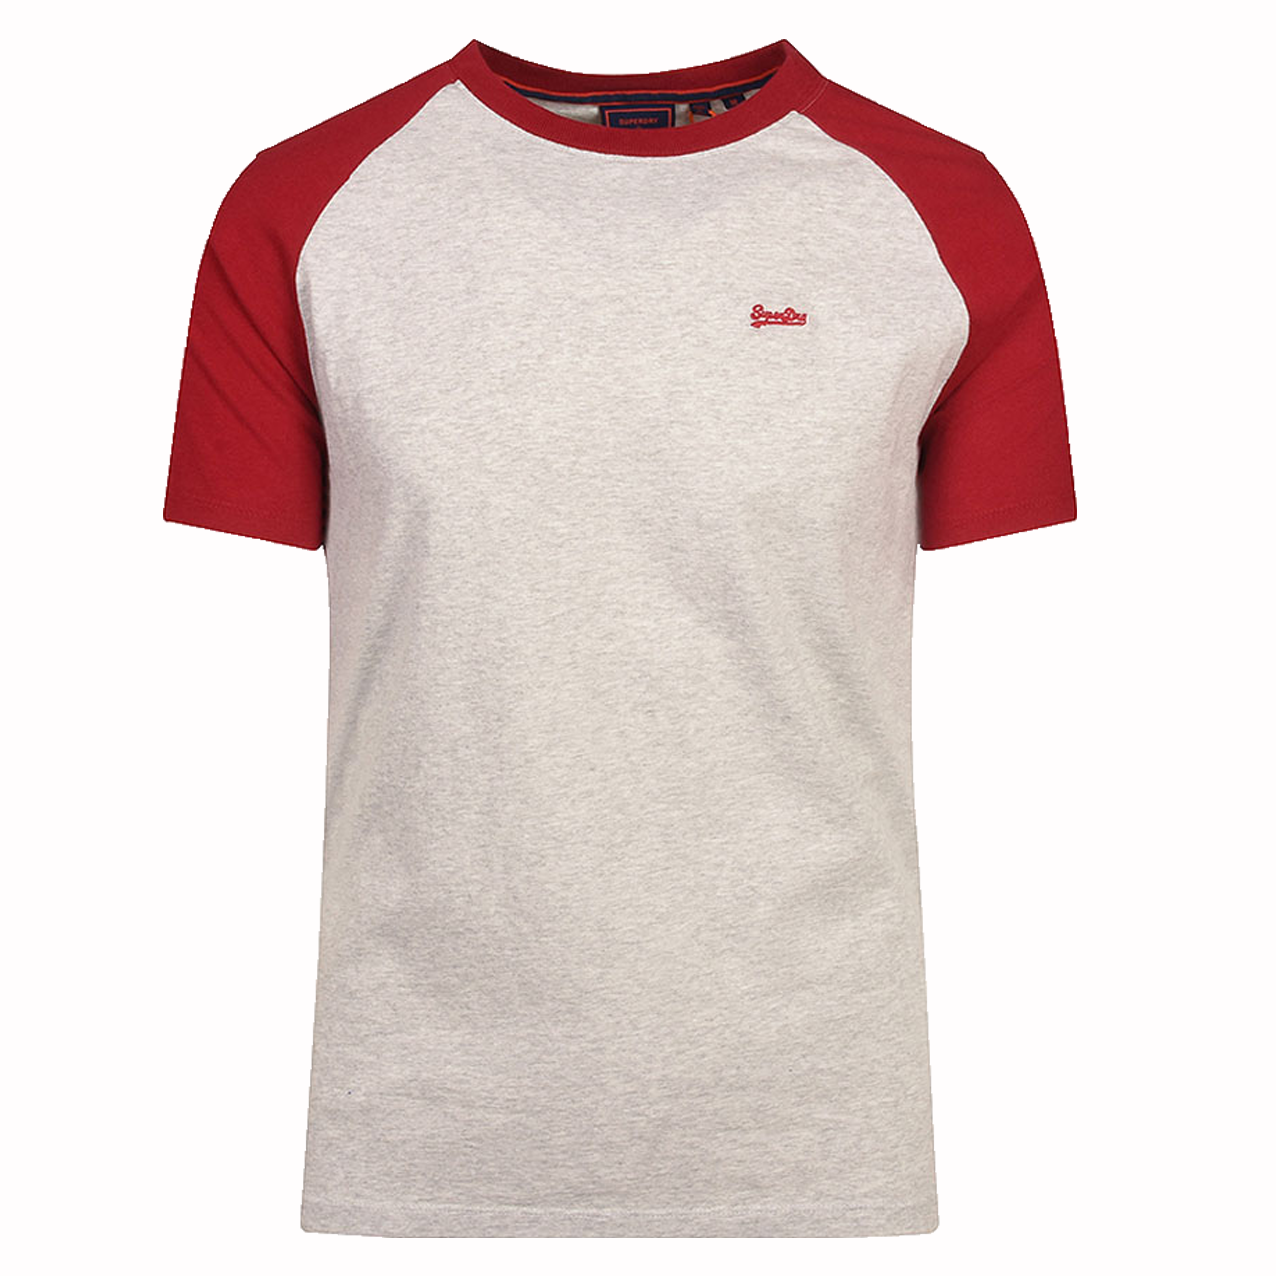 SUPERDRY VINTAGE BASEBALL TEE GREY/RED M1011296A-6ZS